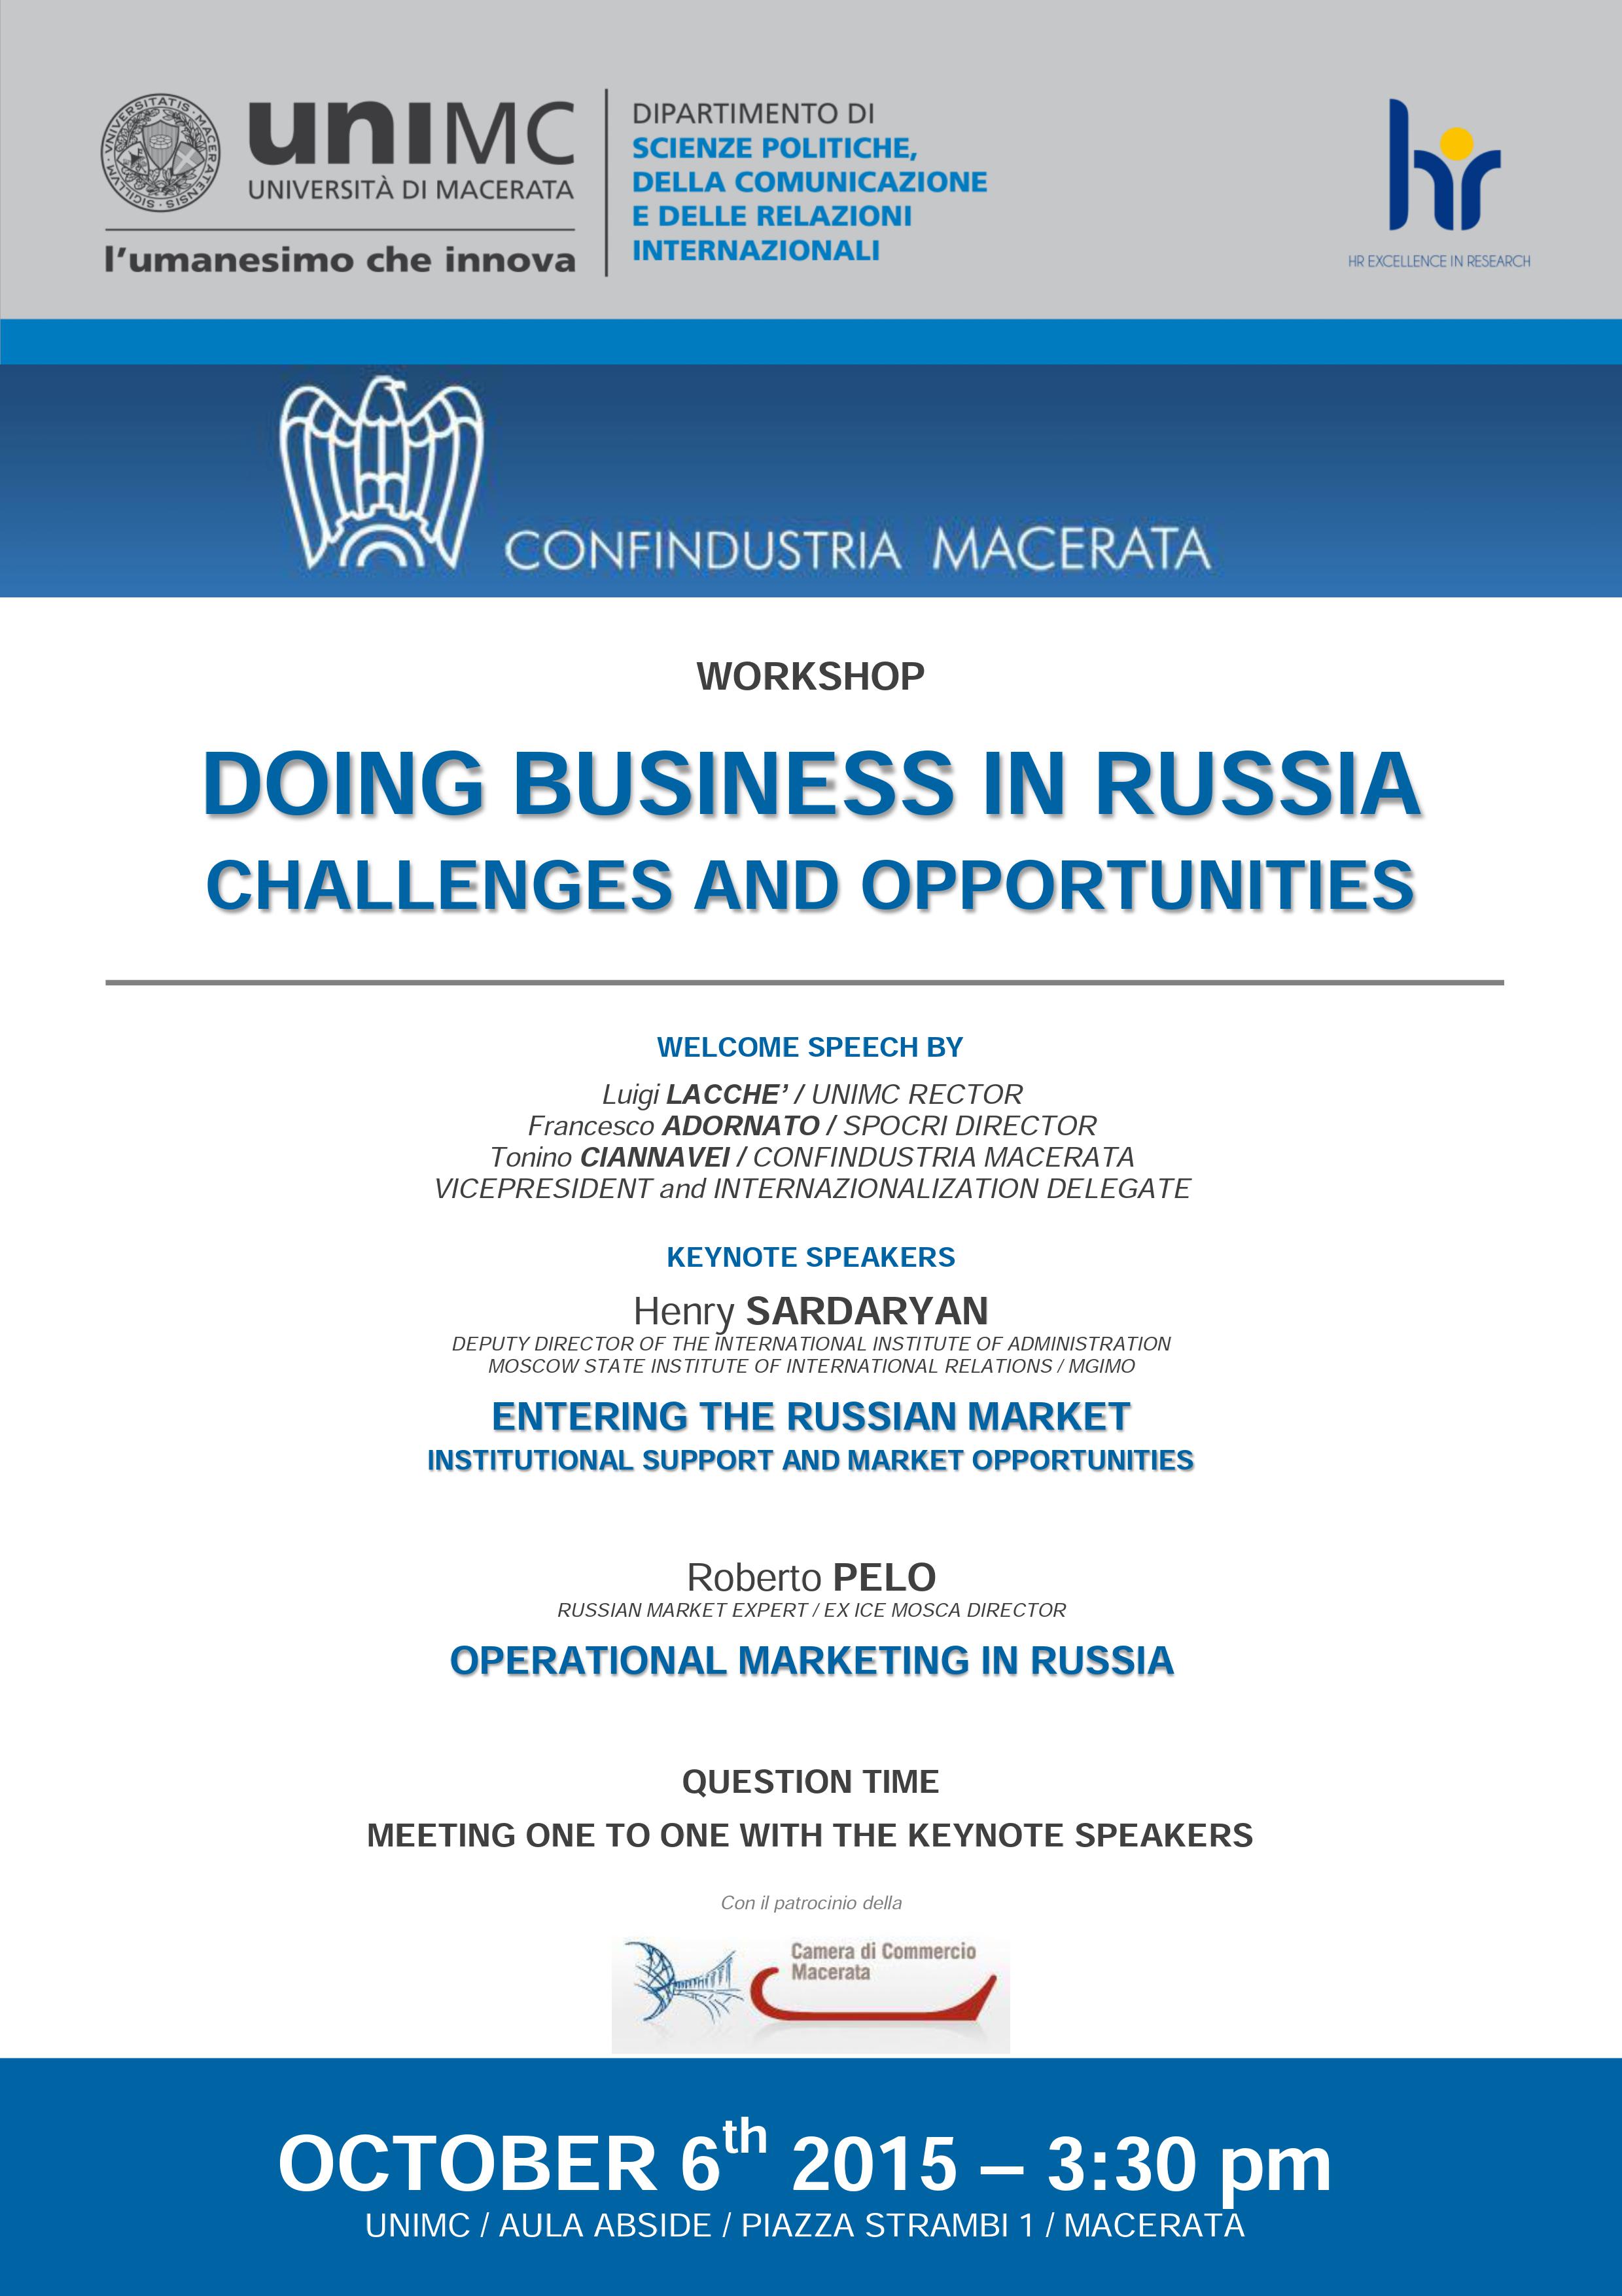 WORKSHOP "Doing business in Russia - challenges and opportunities''